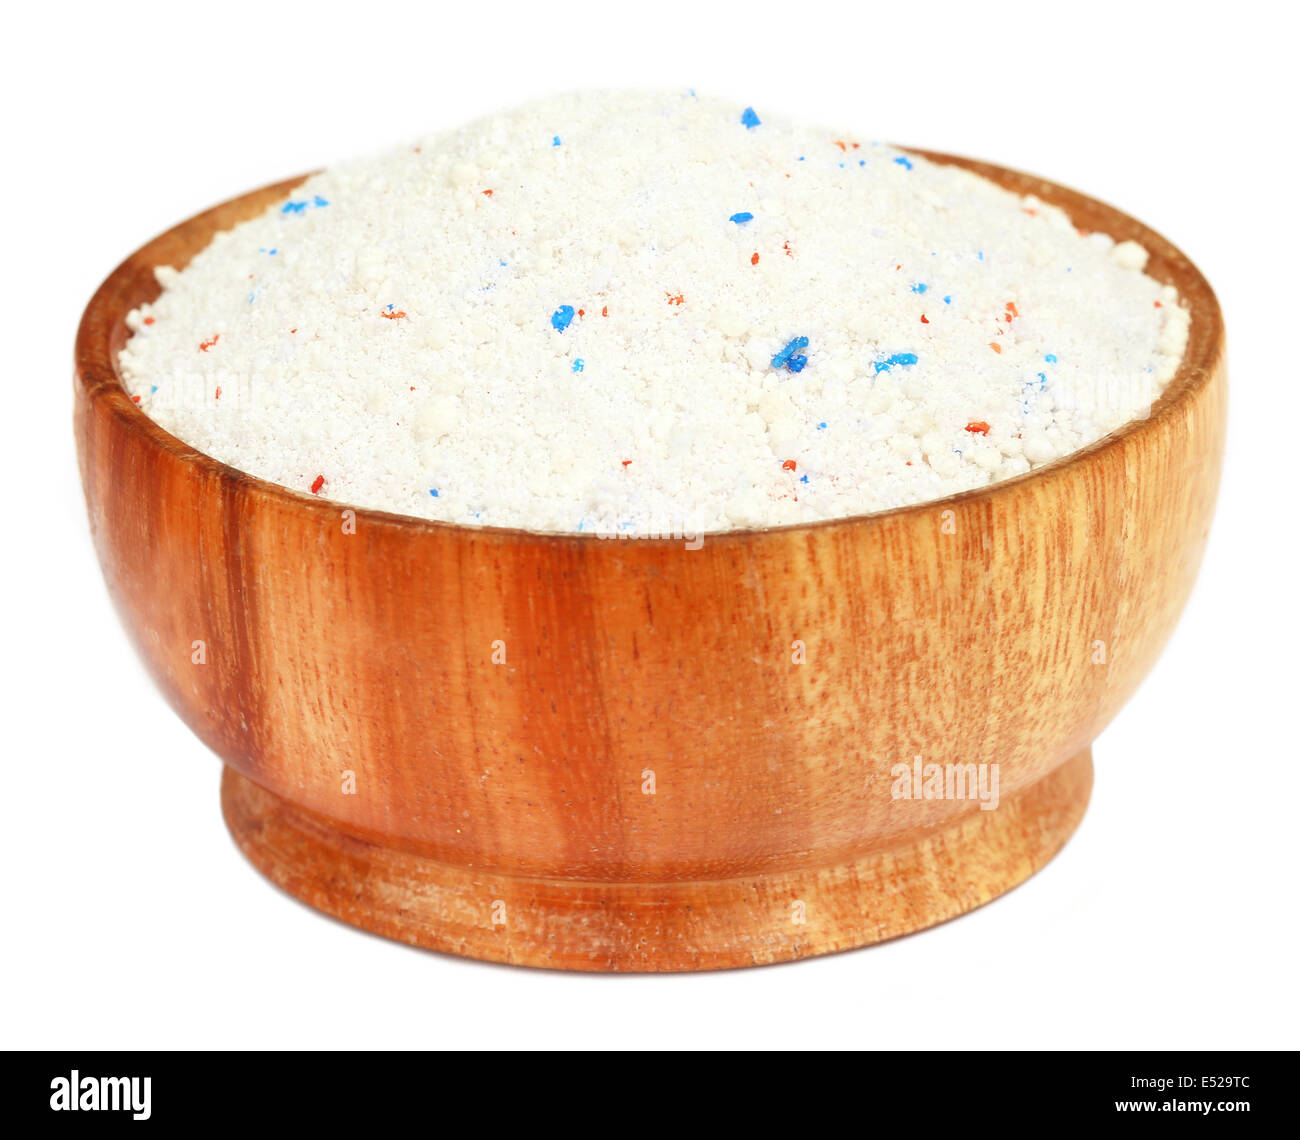 Detergent powder in a wooden bowl Stock Photo